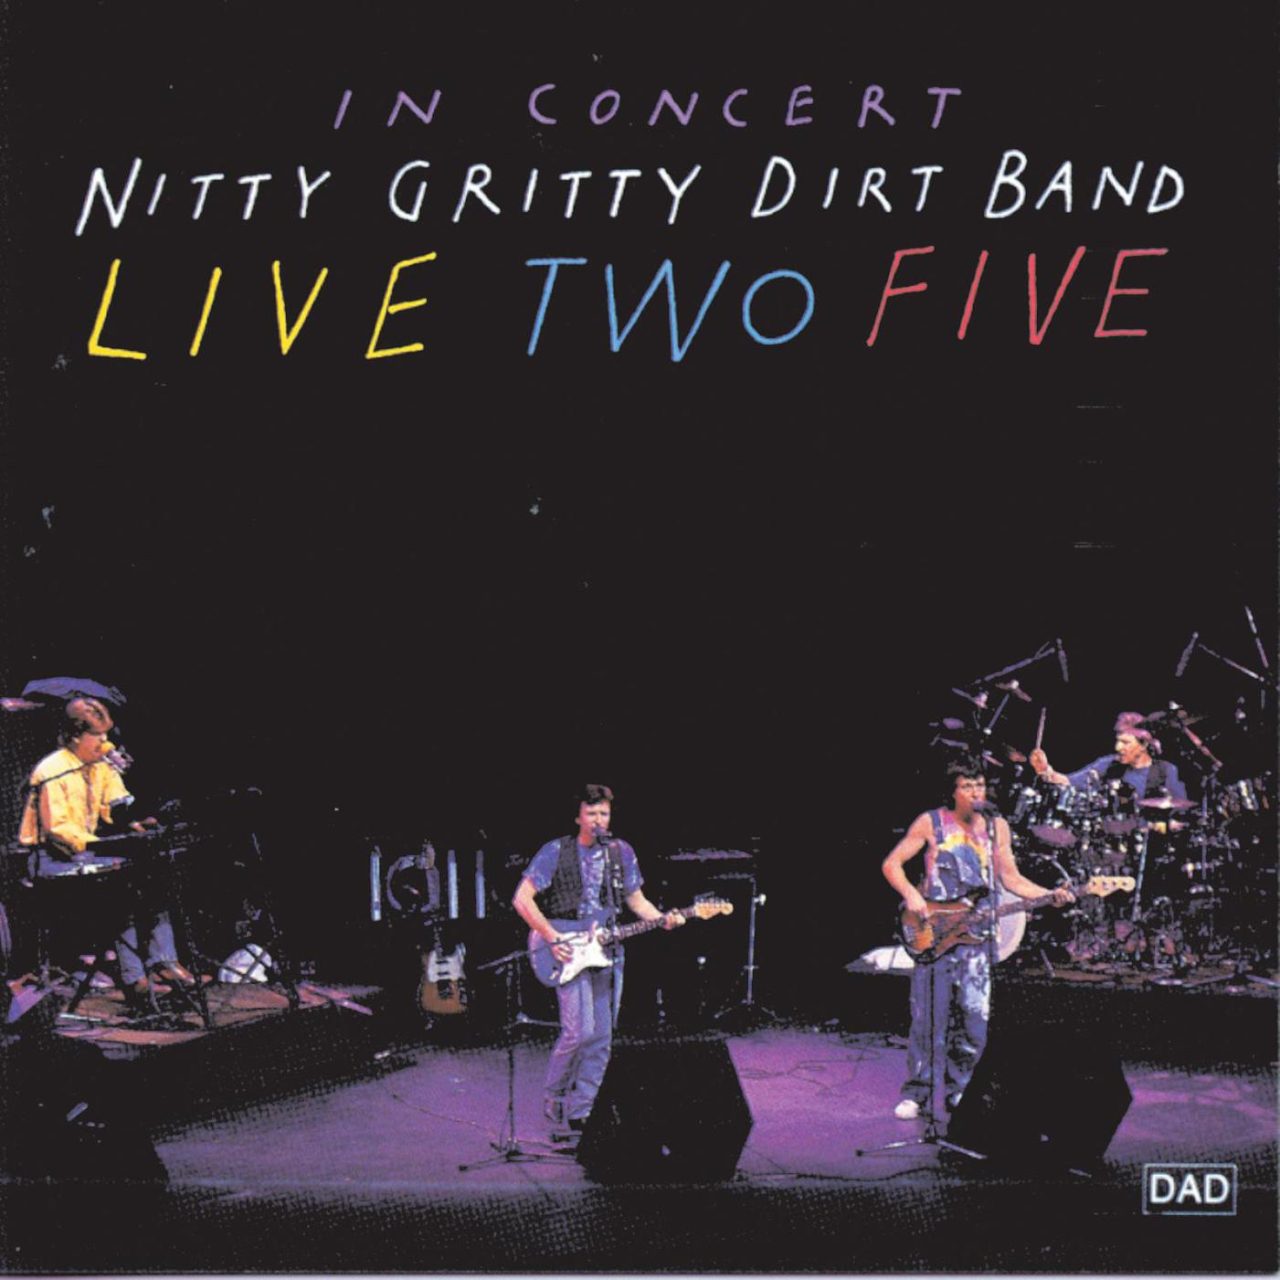 Nitty Gritty Dirt Band – Live Two Five cover album